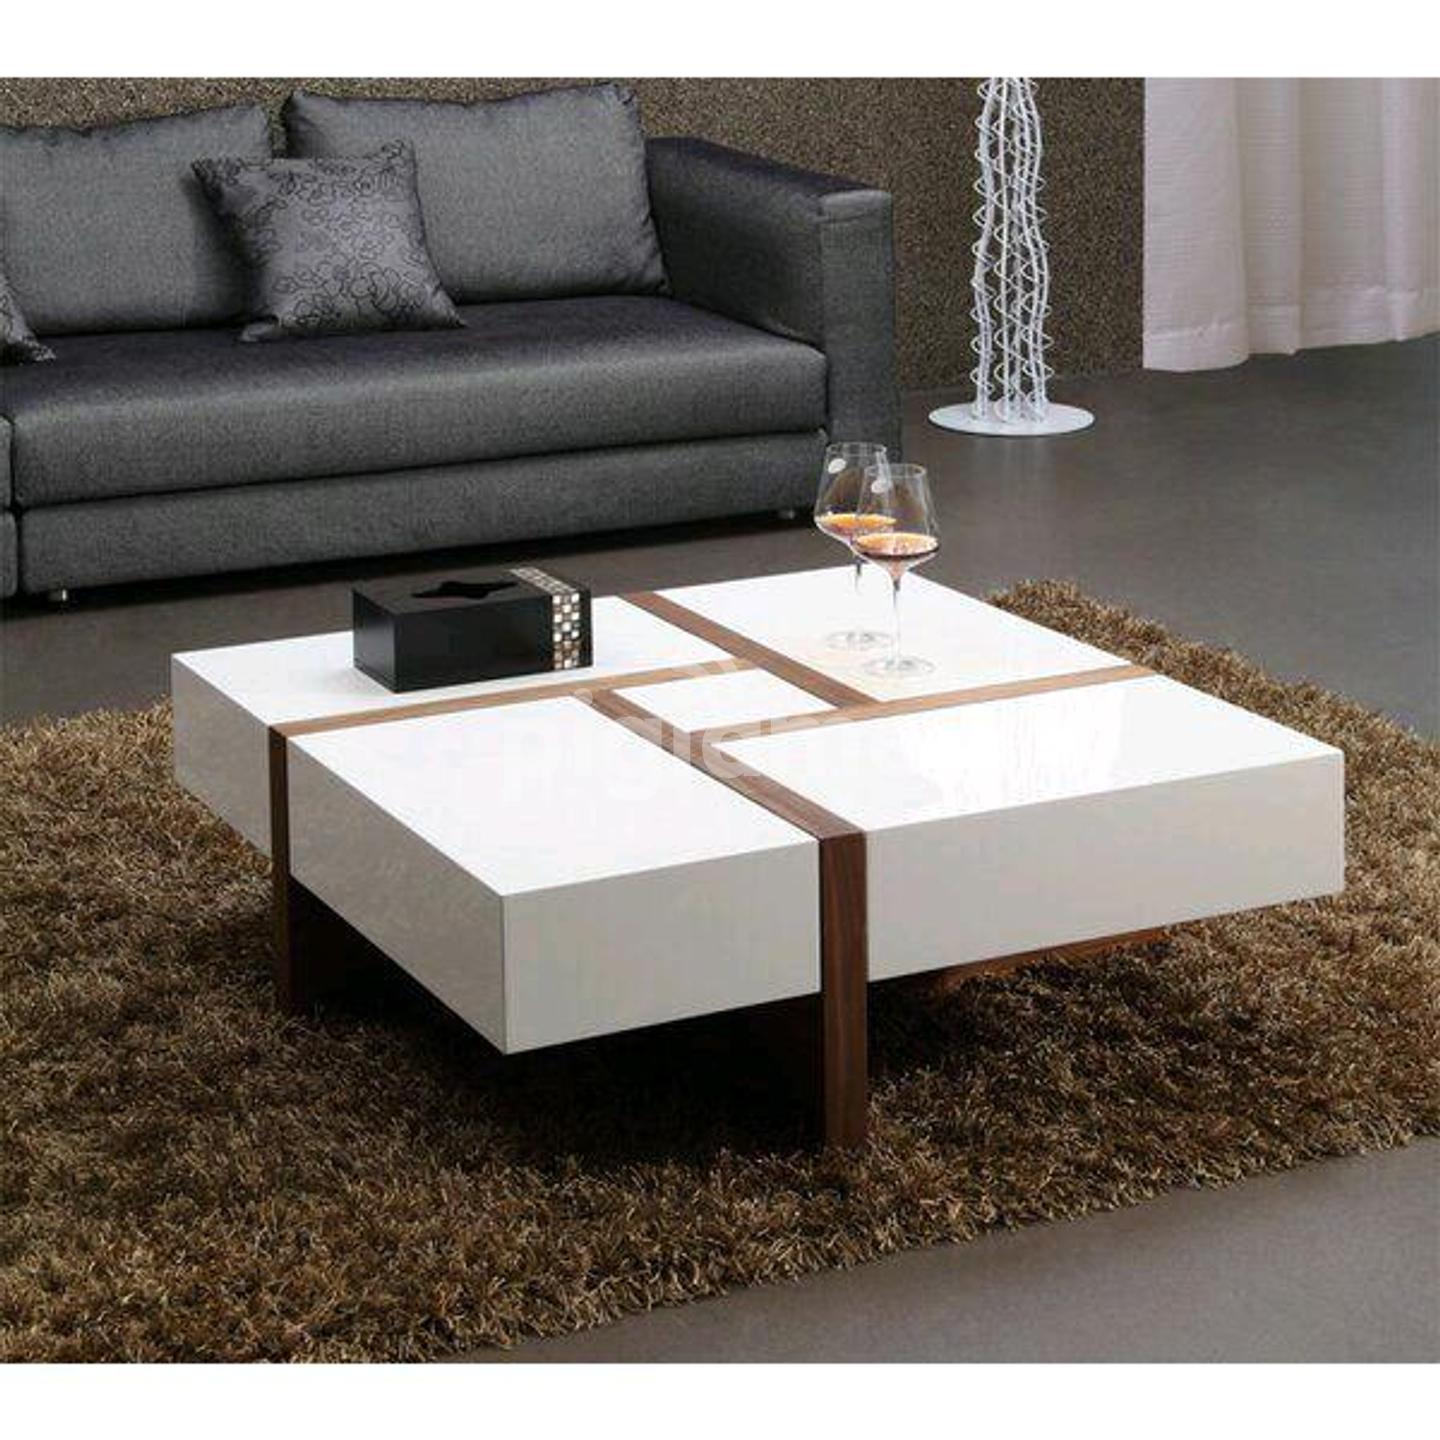 Modern Coffee Tables For Sale